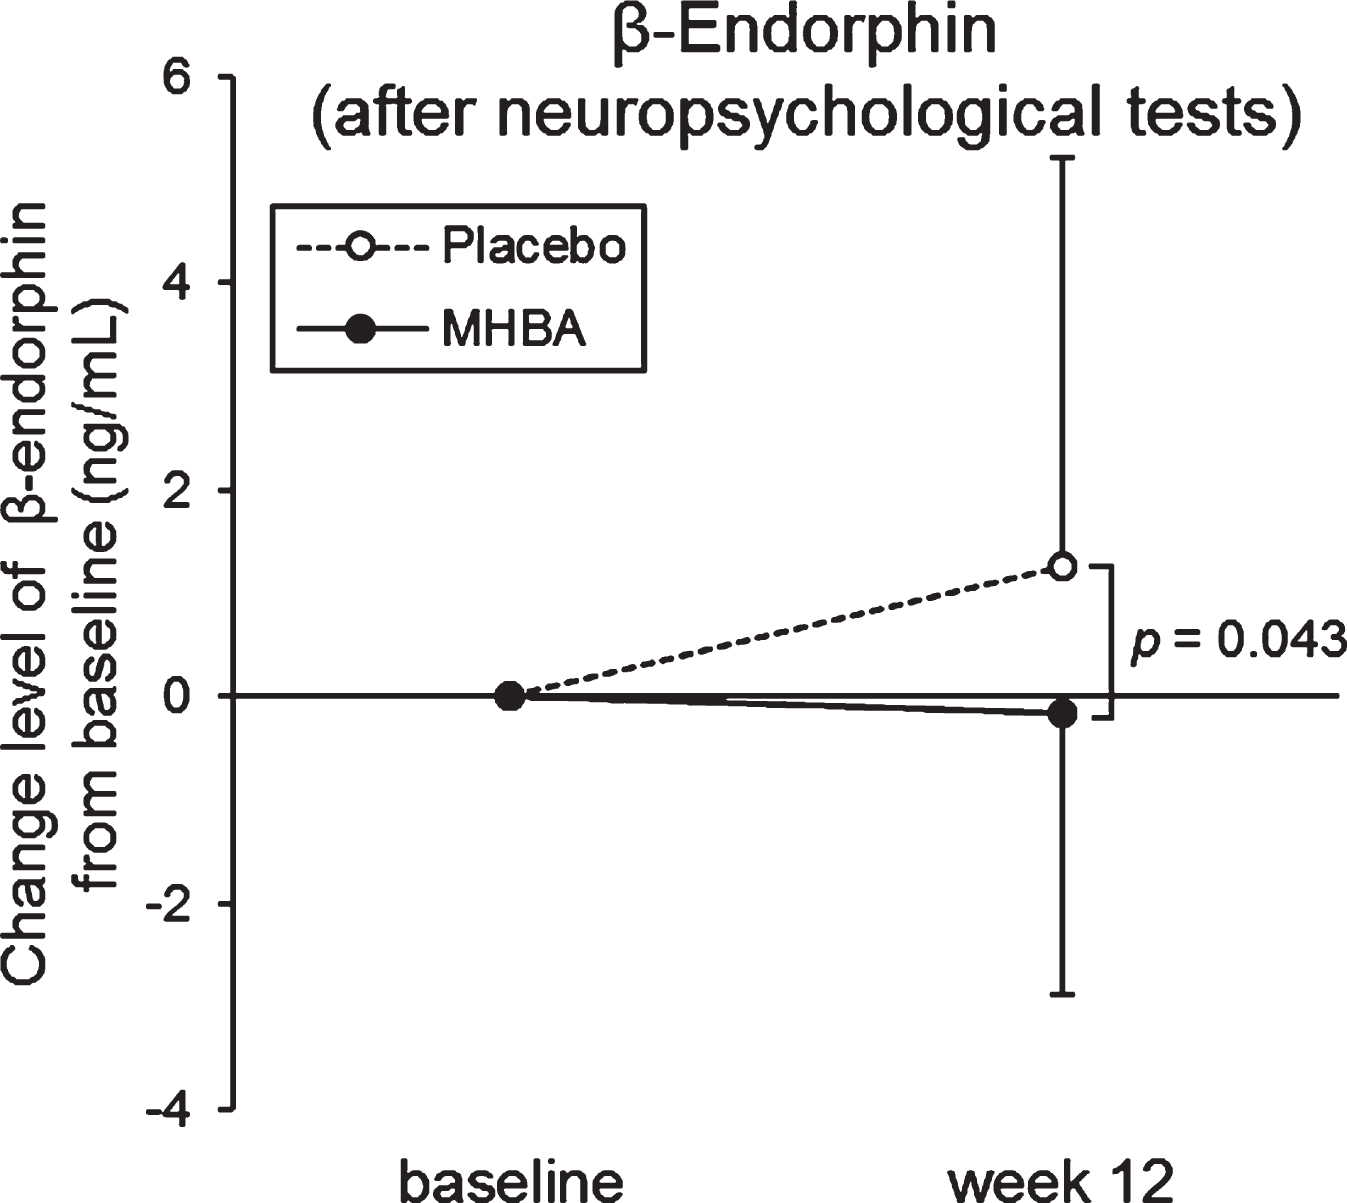 Changes in β-Endorphin levels at baseline and week twelve (after the neuropsychological tests). The solid line indicates the MHBA group (n = 49) and the dotted line indicates the placebo group (n = 48). Data points represent means and error bars indicate SD. p-value shows between-group differences performed using unpaired t tests.